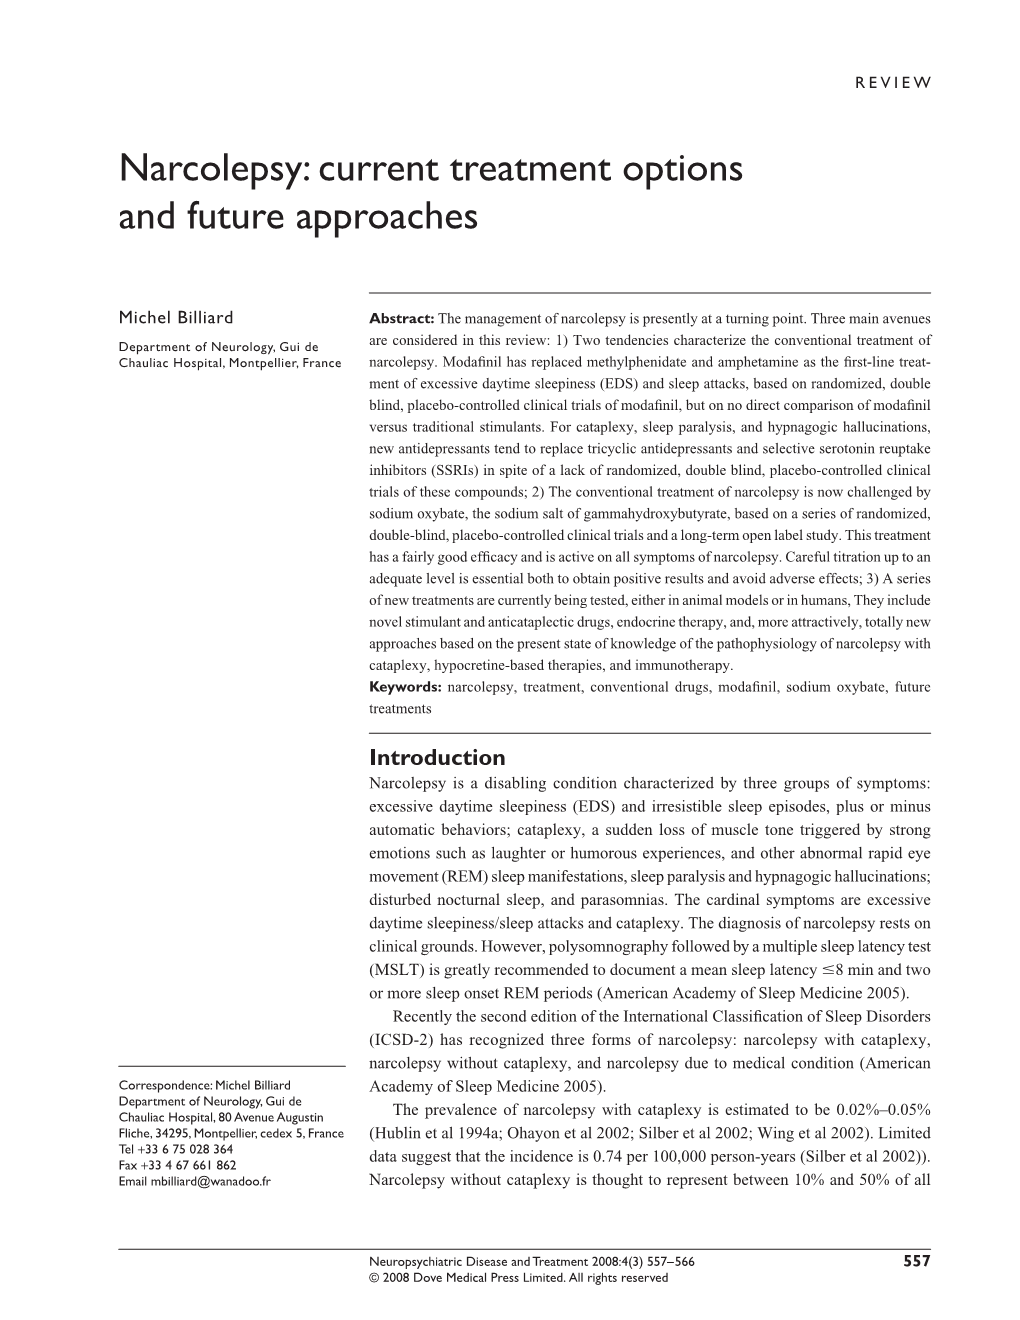 Narcolepsy: Current Treatment Options and Future Approaches